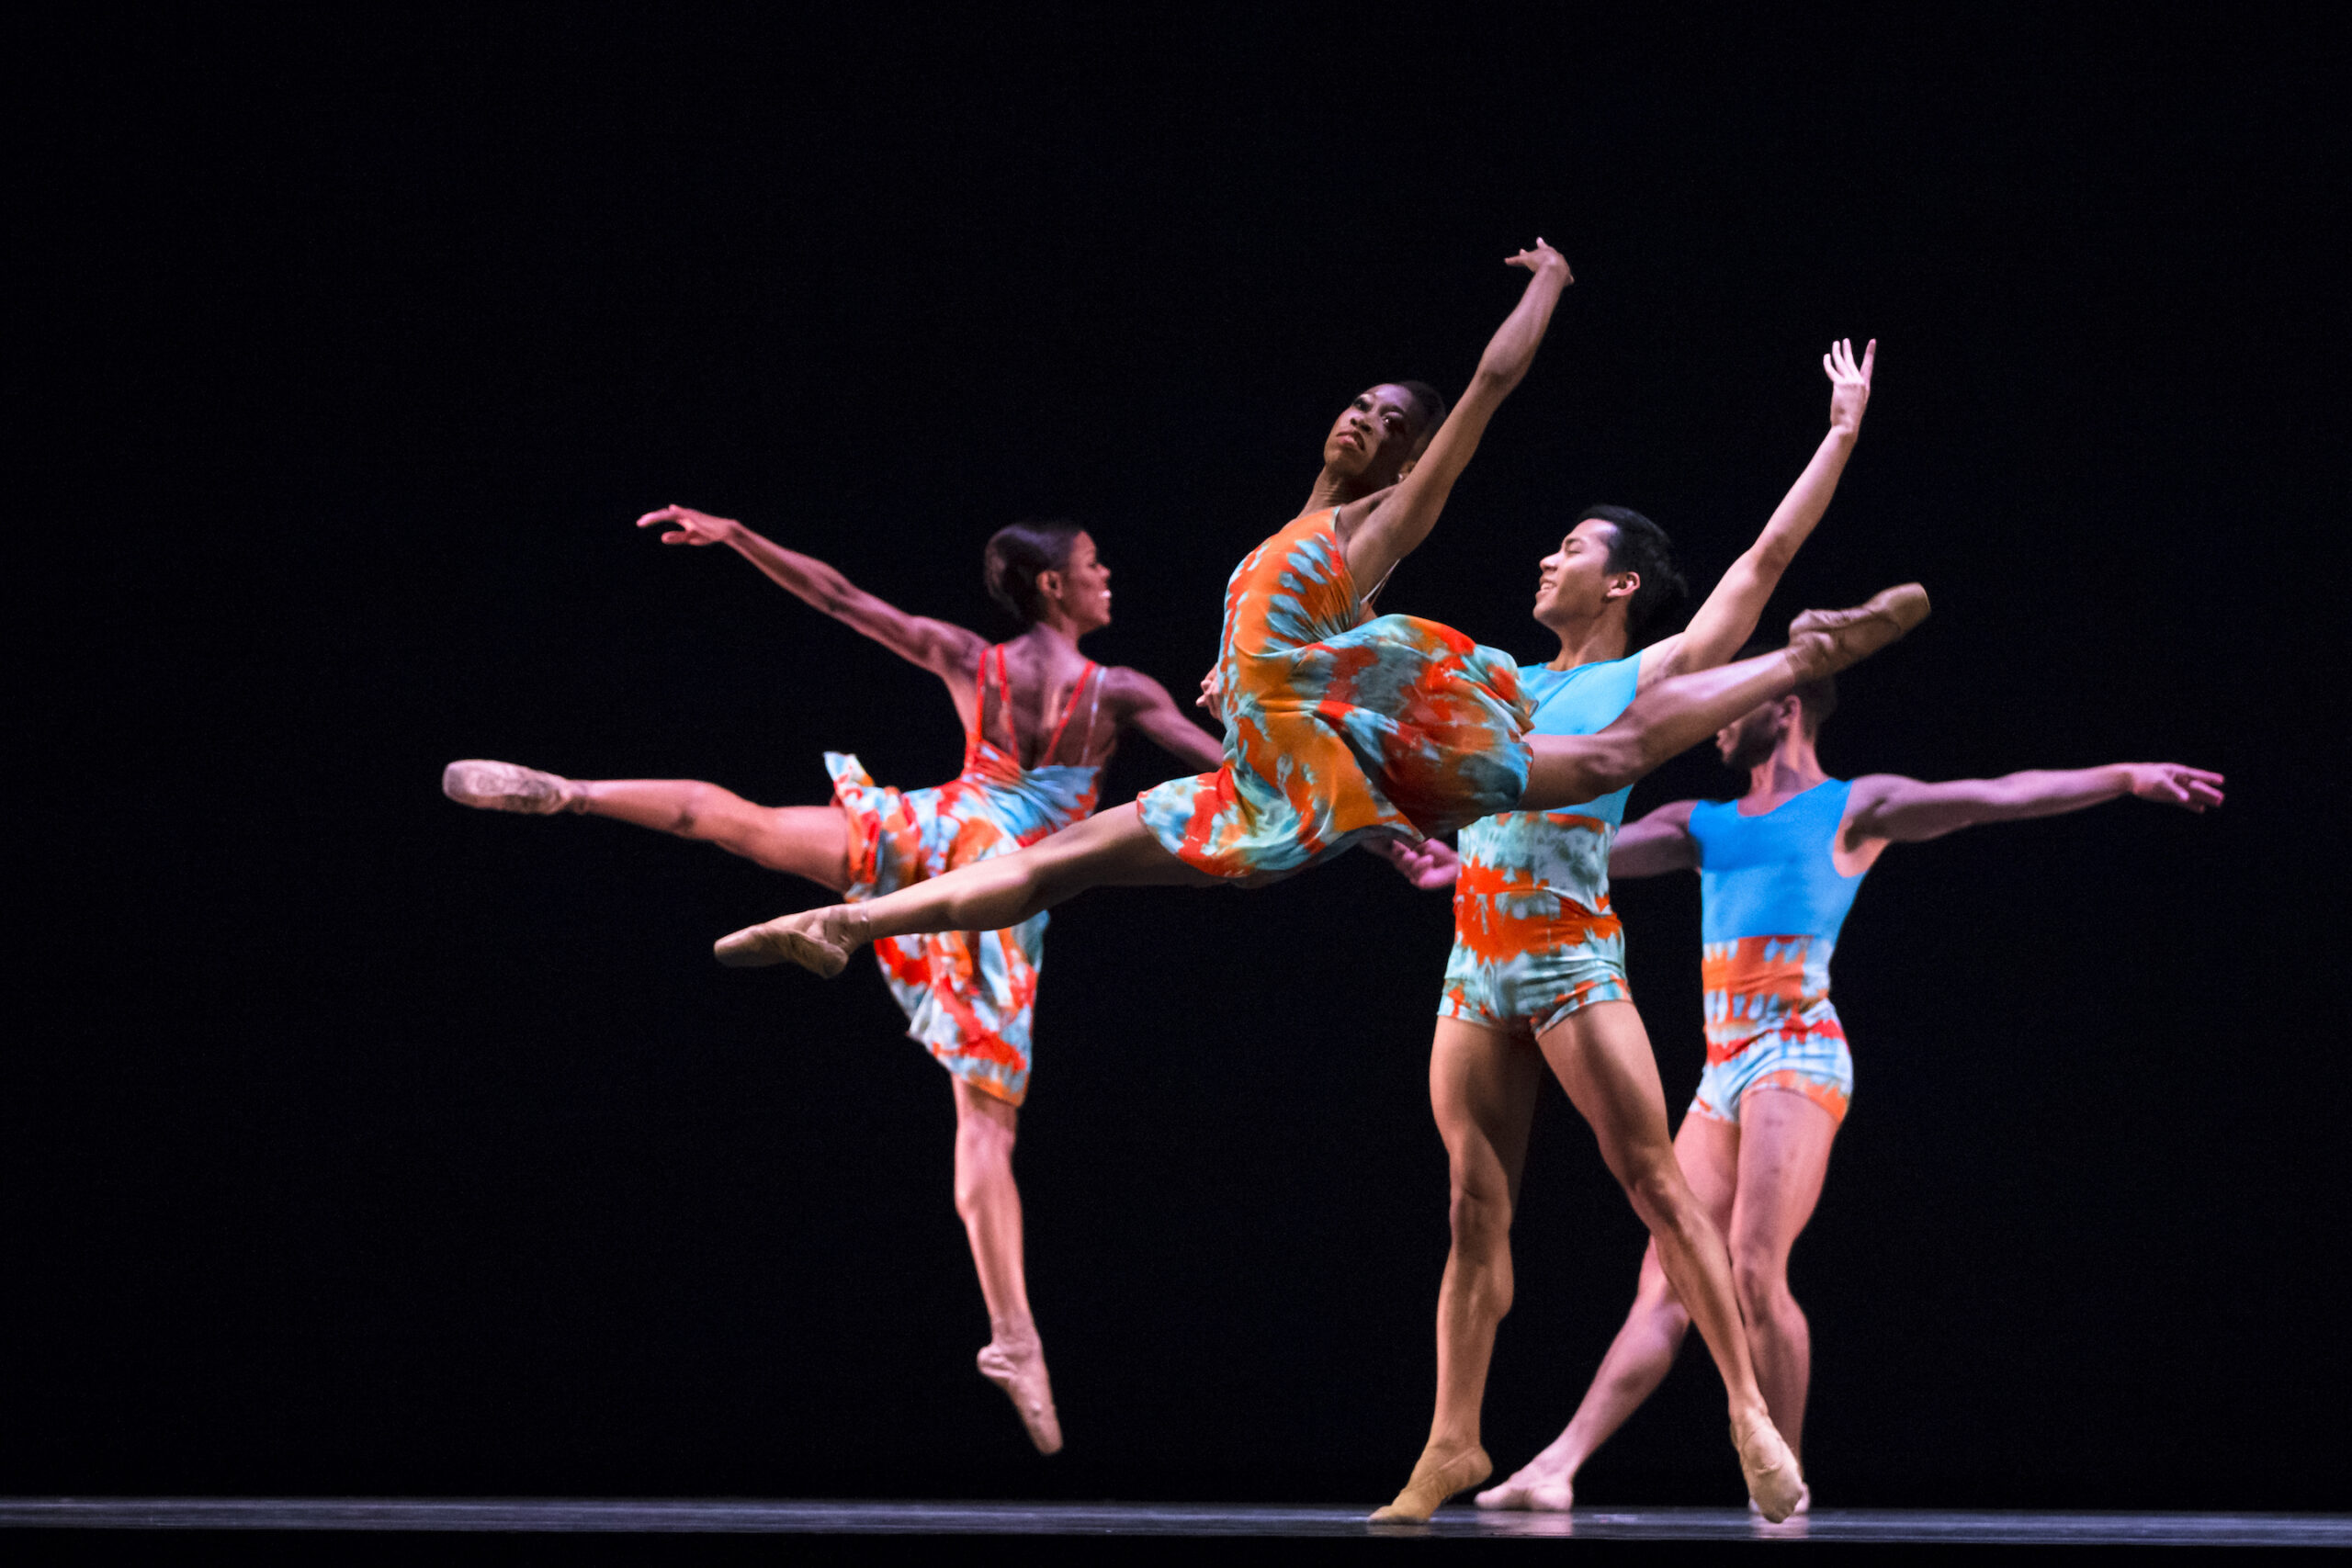 Dancers in blue and orange dancewear perform leaps and other jumps.